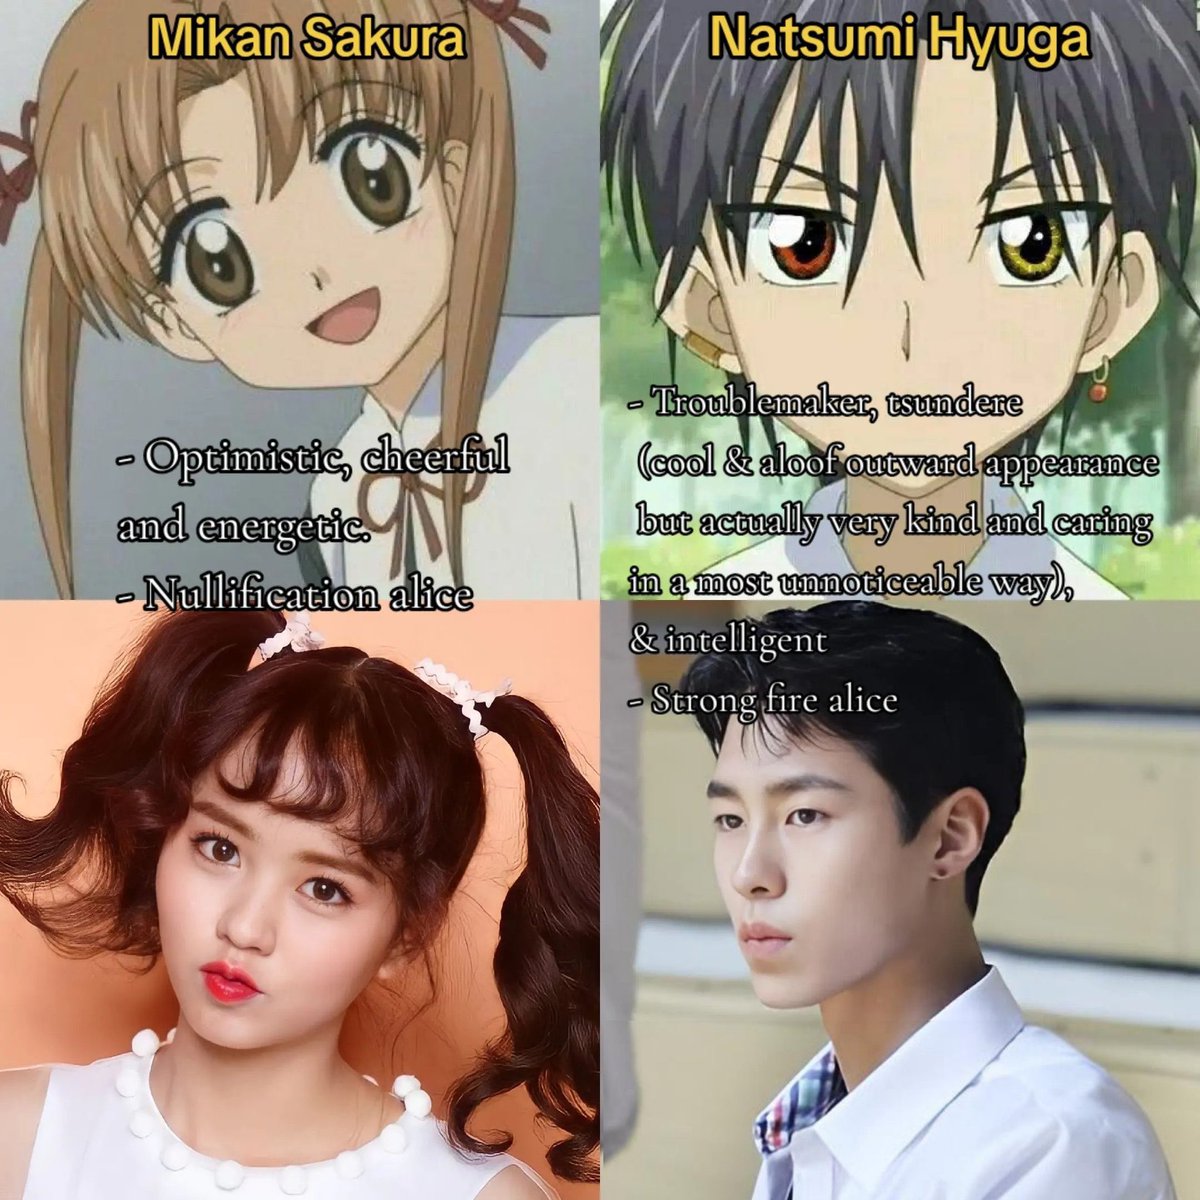 back to our #KimSoHyun x #LeeJaeWook drama manifestation ☺️

them in a 🇰🇷 live adaptation of #GakuenAlice 🏫🔥💥🫶

• revamp to high-school division
• fantasy / romcom
• elite academy for gifted people w/ 'alices,' an ability that is unique depending on the individual being.